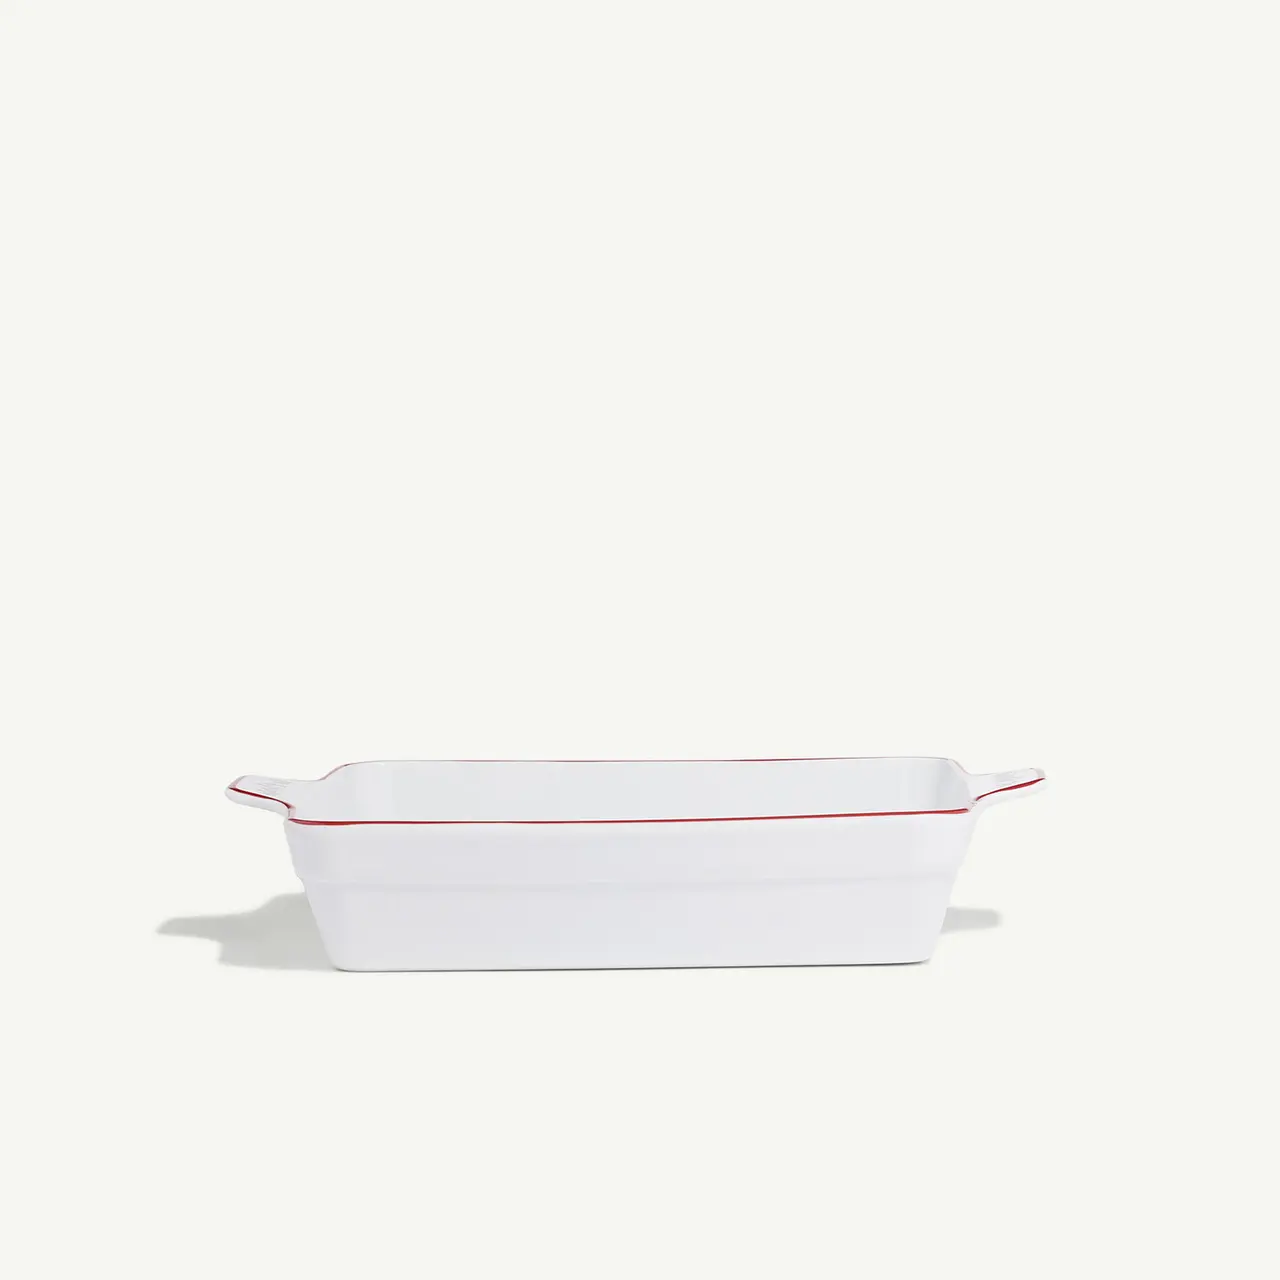 A white rectangular baking dish with red trim set against a plain background.